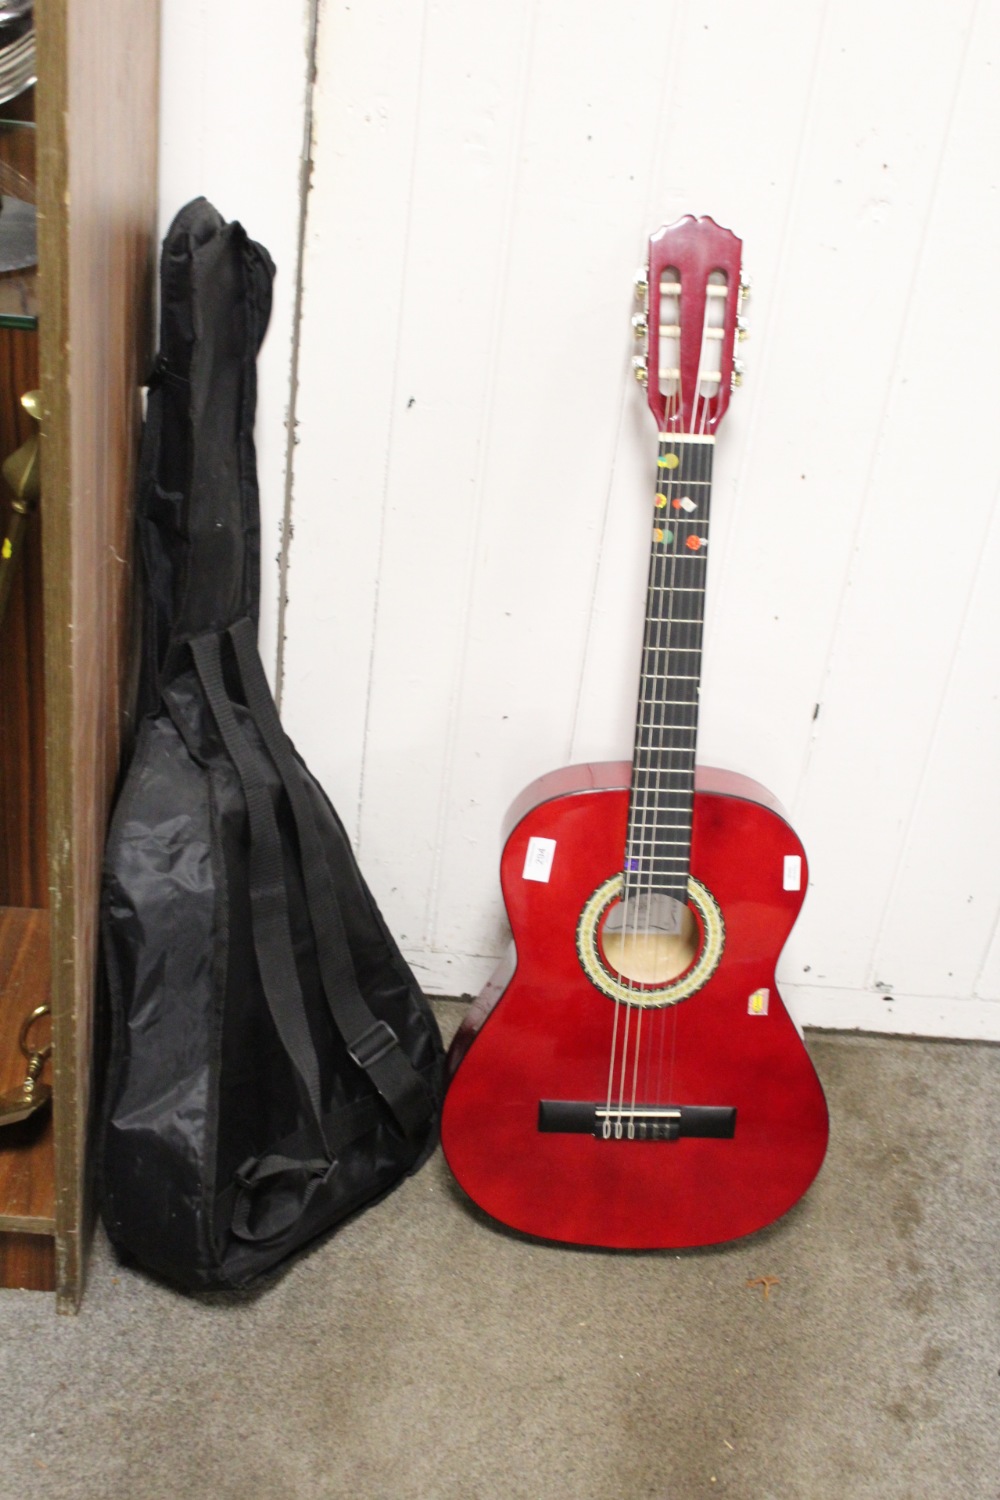 A CHILDS MIGUEL ALMERA PURE SERIES CLASSIC ACOUSTIC GUITAR IN CHERRY RED FINISH, WITH SOFT CARRY